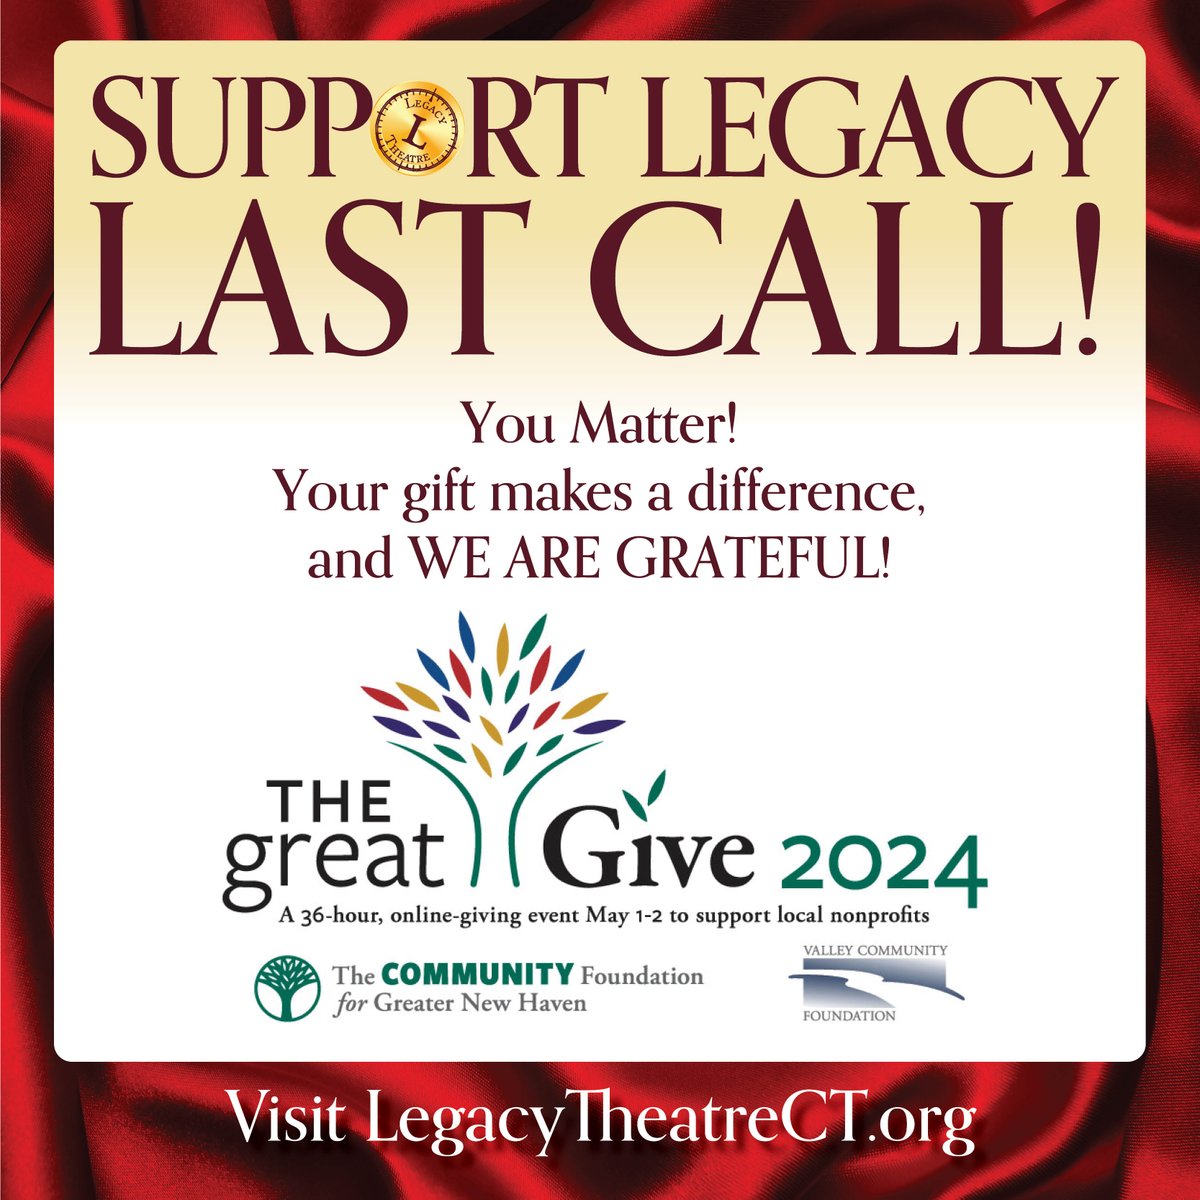 LAST CALL! Your gift to Legacy during the Great Give makes a difference, no matter how small. Make a gift to Legacy Theatre via The Great Give by 8pm!

legacytheatrect.org/greatgive

#legacytheatrect #thegreatgive #givelocal #branfordct #stonycreekct #newhavenct #greatgive2024